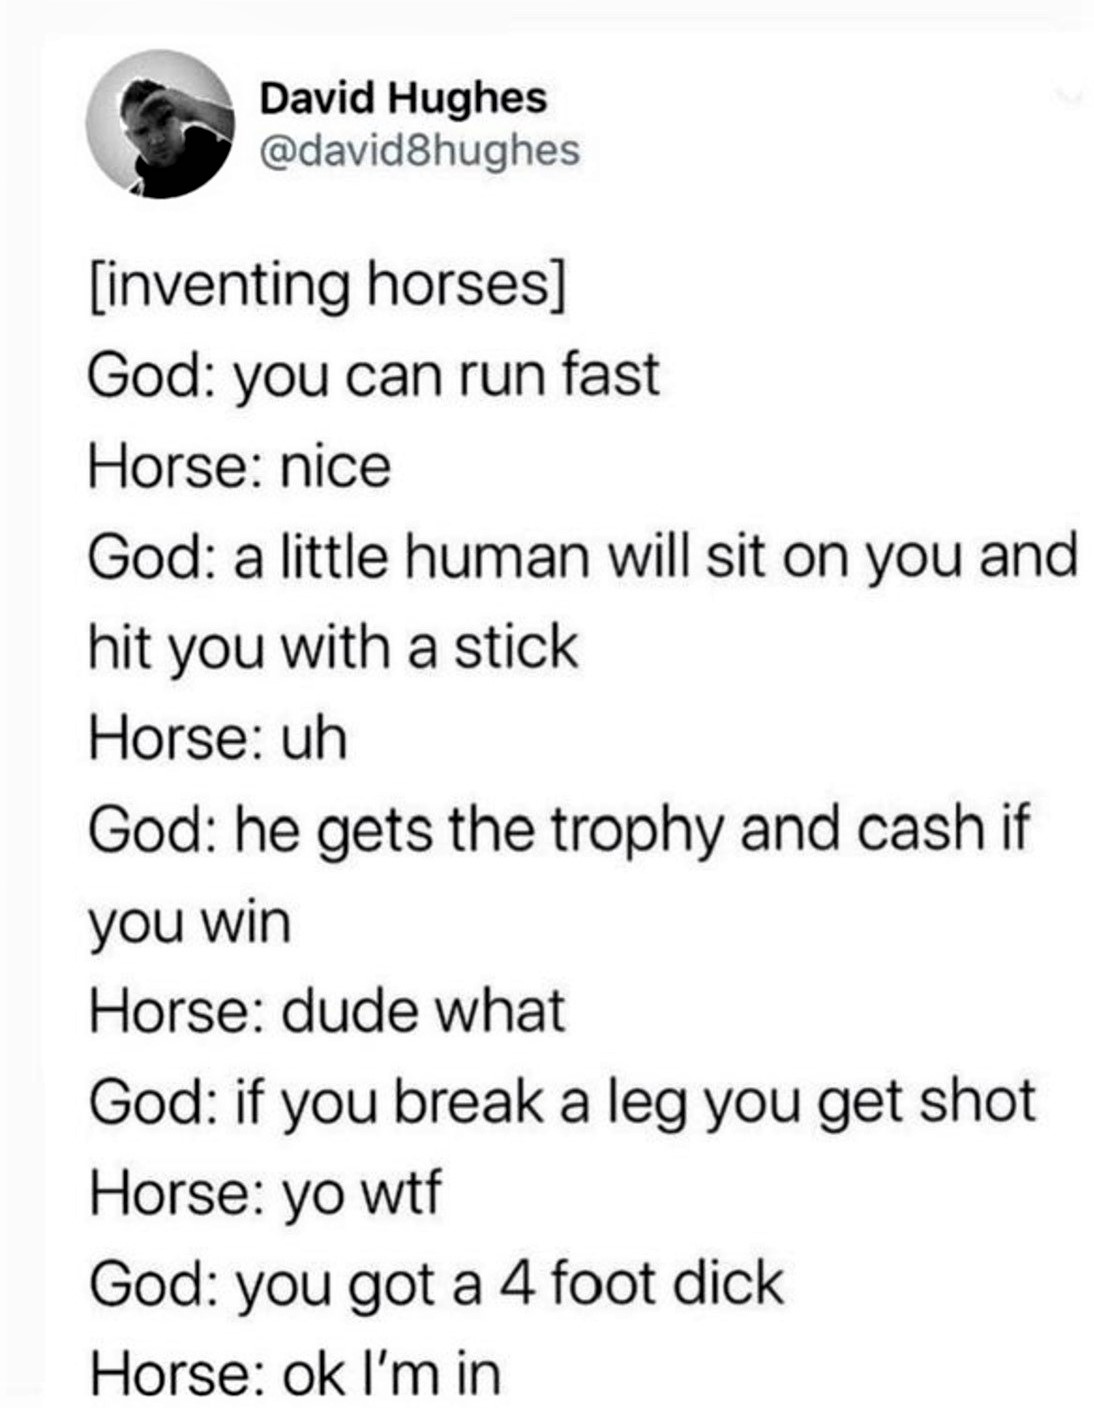 angle - David Hughes inventing horses God you can run fast Horse nice God a little human will sit on you and hit you with a stick Horse uh God he gets the trophy and cash if you win Horse dude what God if you break a leg you get shot Horse yo wtf God you 